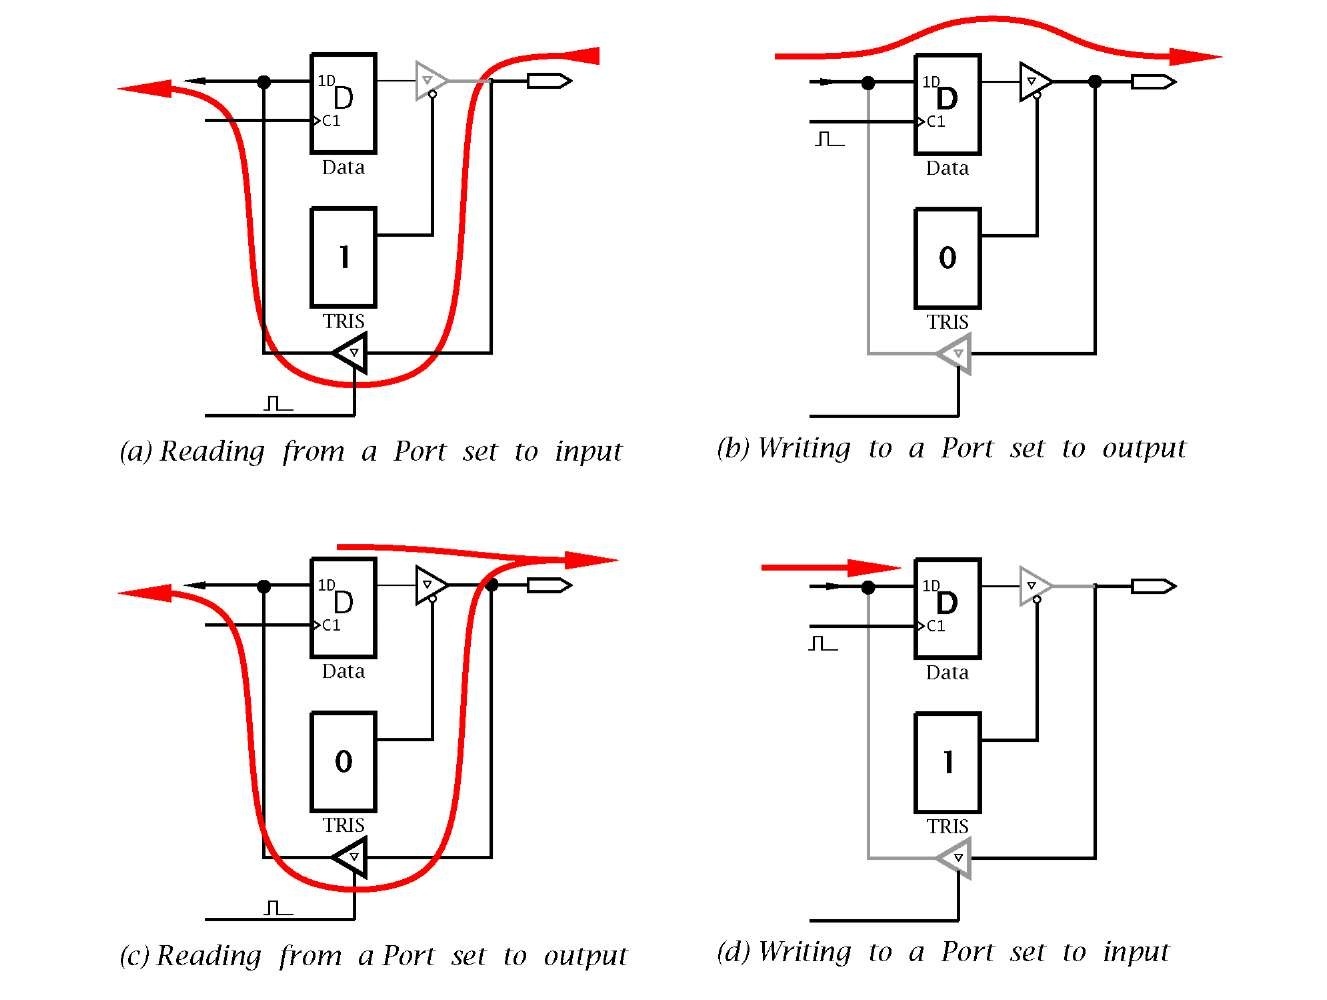 Reading and writing to a port bit set to input or output.